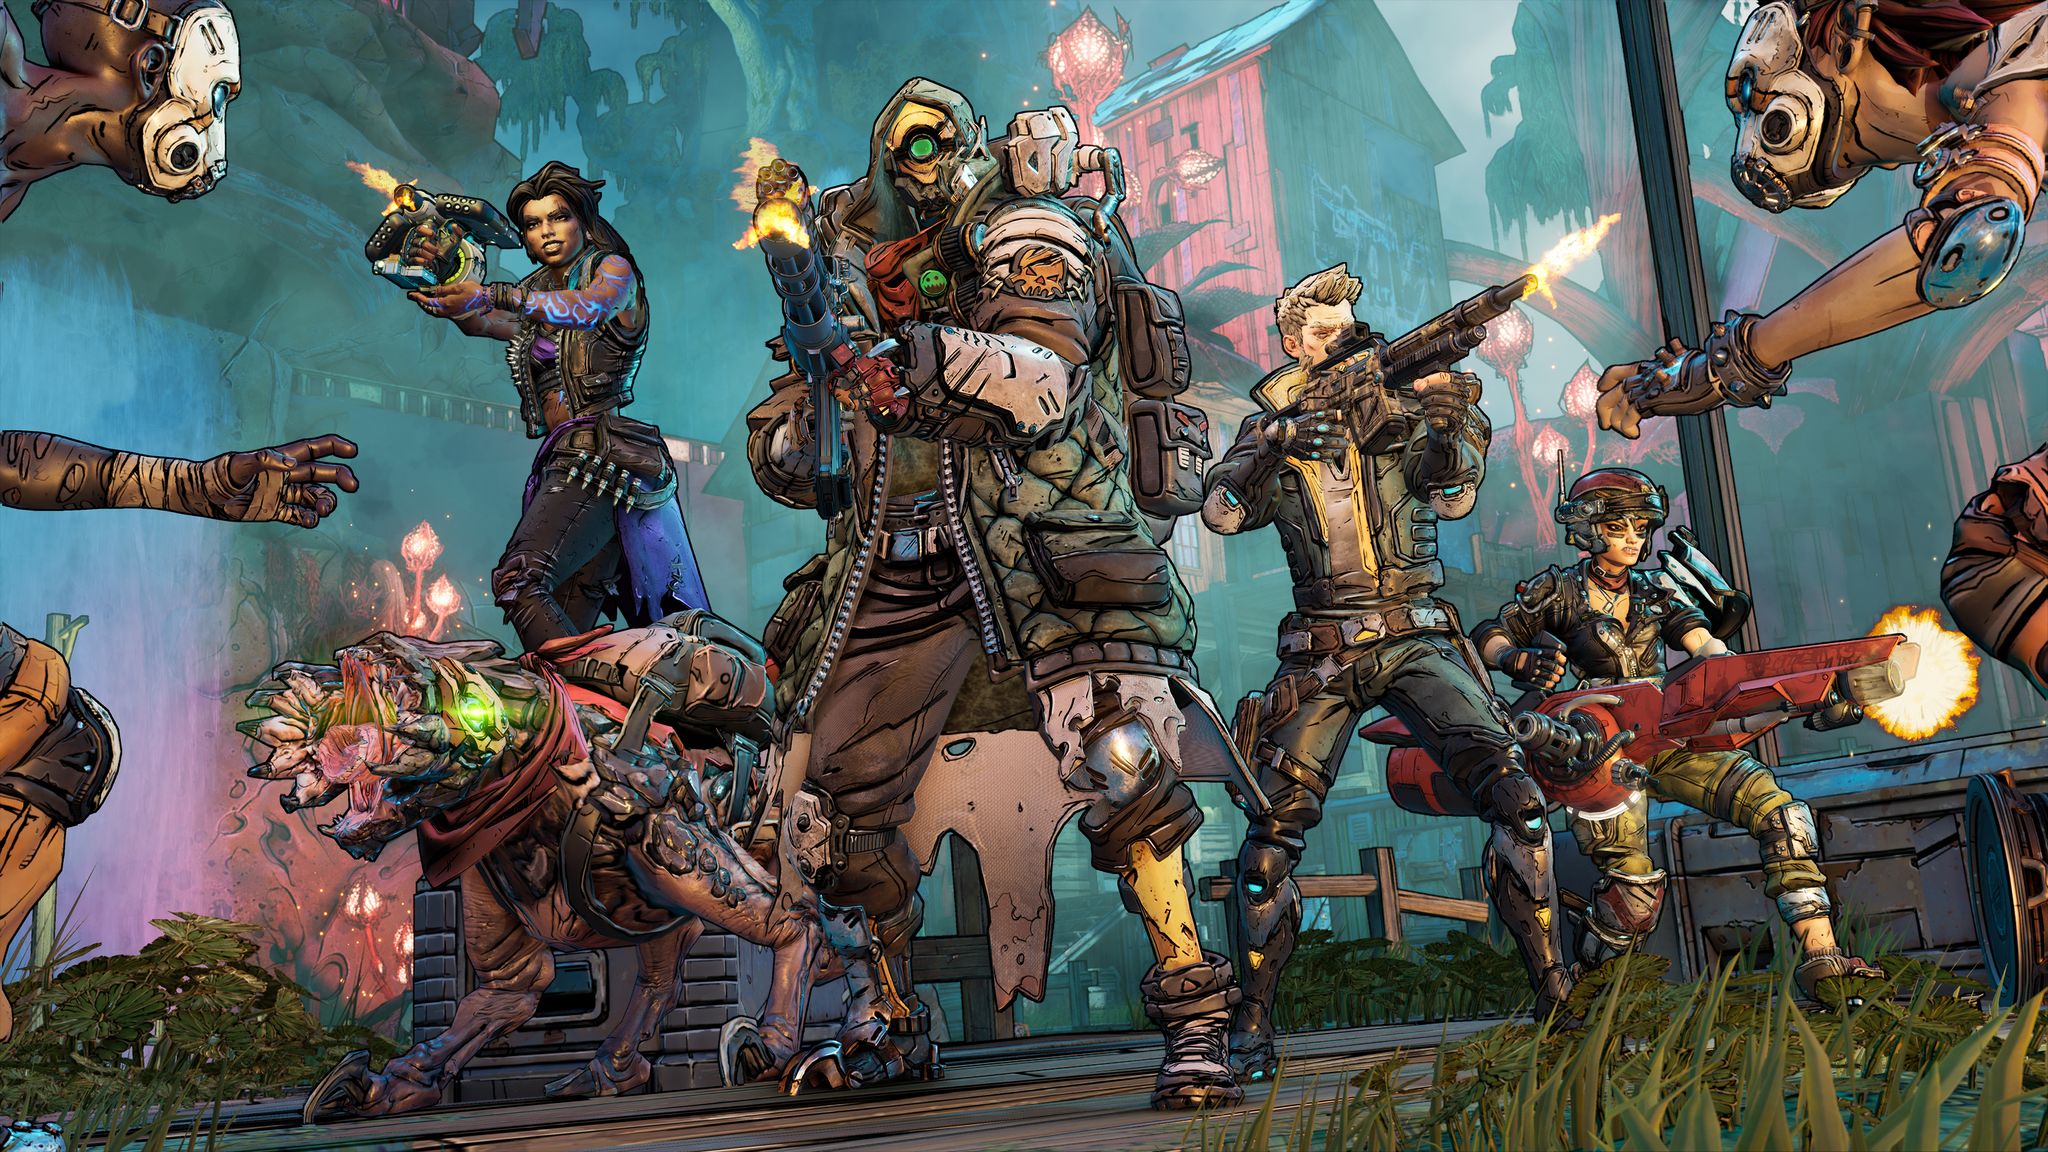 Borderlands 3 - The four playable Vault Hunters stand together shooting at enemies.